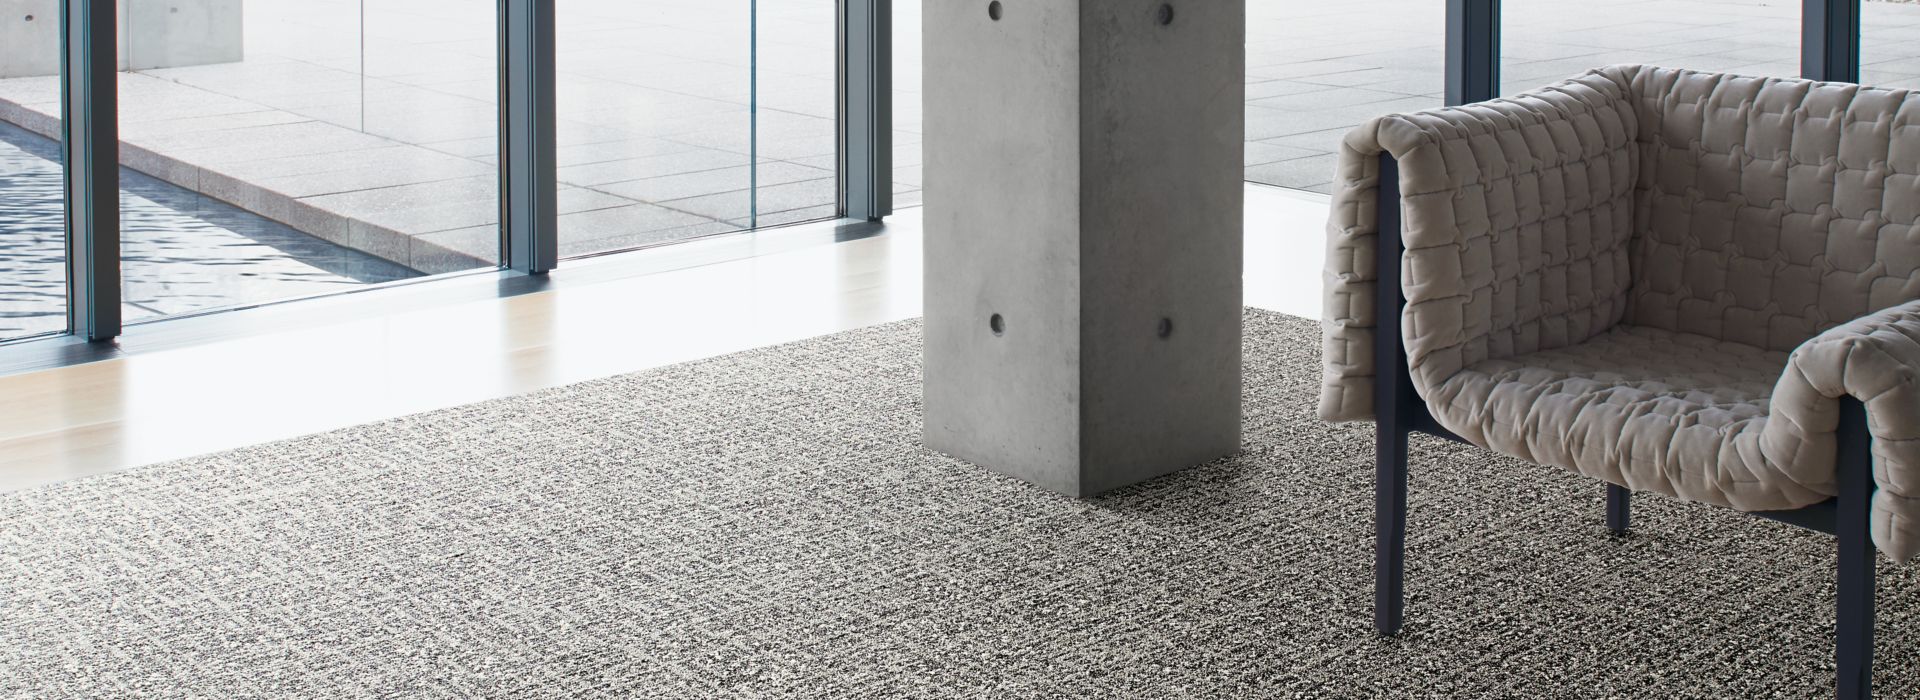 Interface WW890 plank carpet tile and Textured Stones LVT in lobby area with chair